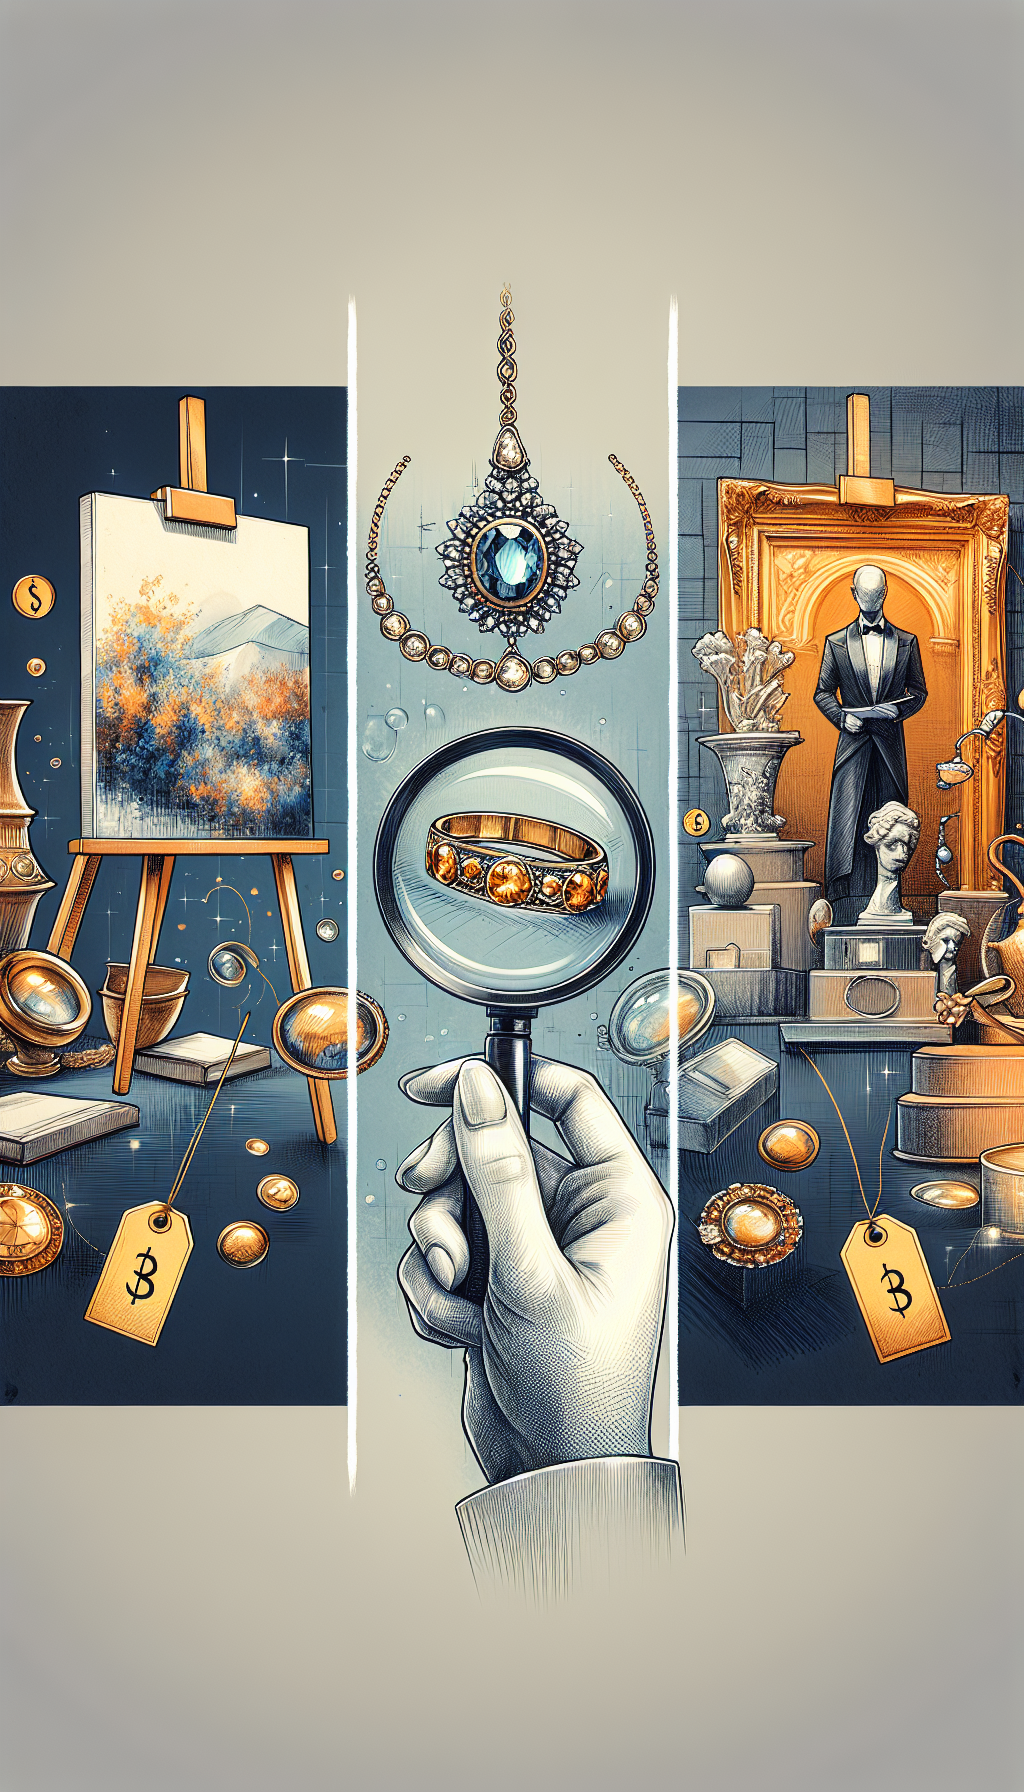 An elegantly composed illustration features three distinct sections, each depicting a different type of appraisal—fine art on an easel, jewelry under a magnifying glass, and antiques at an auction podium. Above each, golden price tags dangle, gradually increasing in size to symbolize varying costs. The styles vary—watercolor, line drawing, and bold realism—showcasing the different expertise levels in art appraisal.